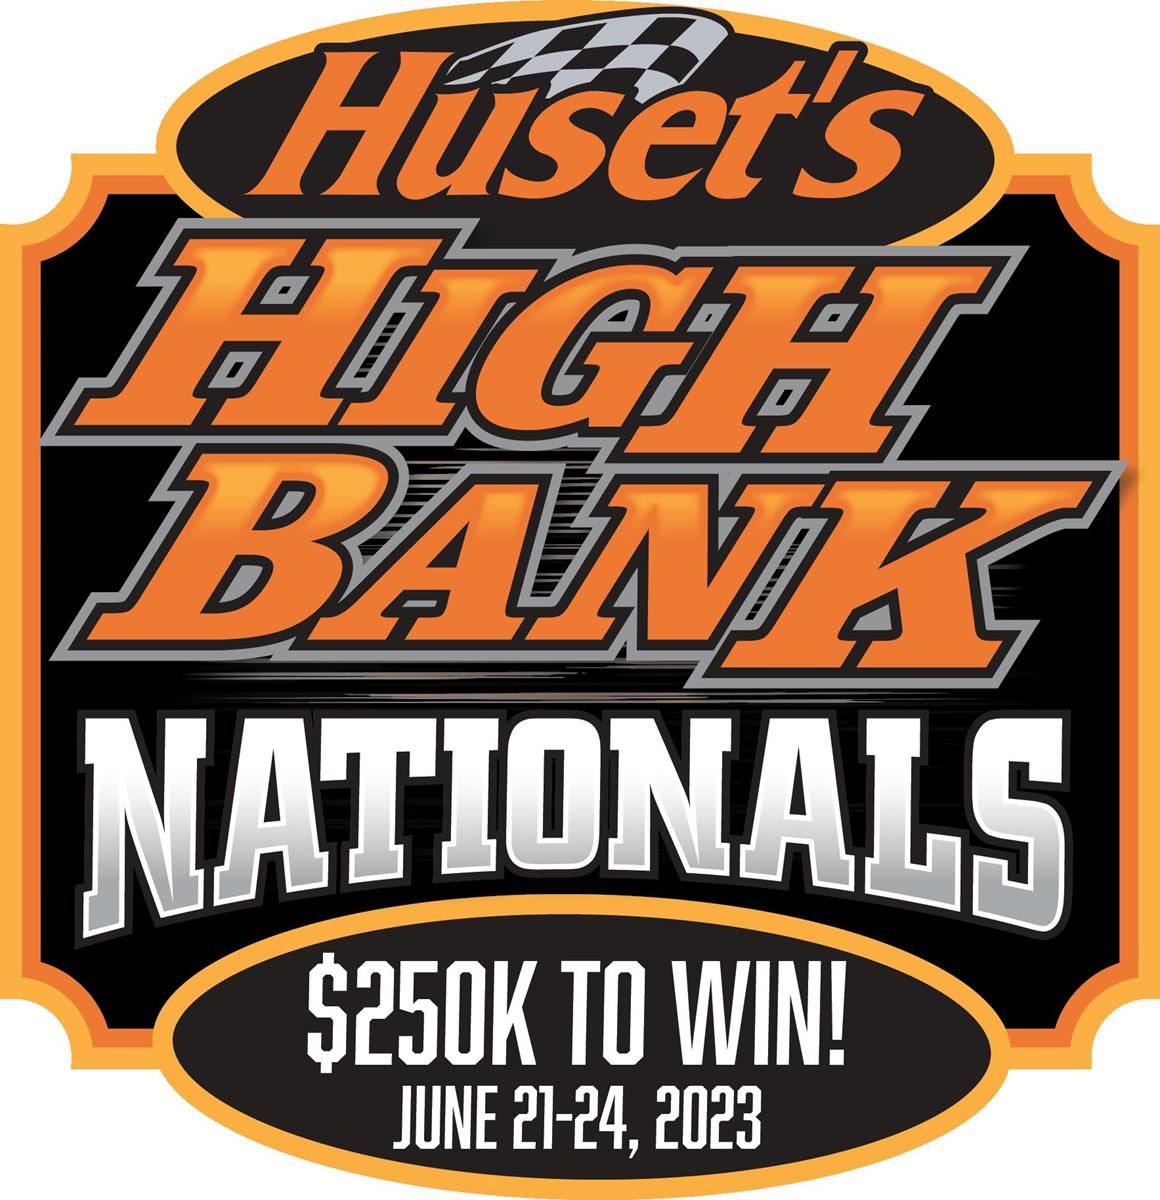 Huset’s High Bank Nationals Features $750,000 Purse, Pre-Registration Now Available